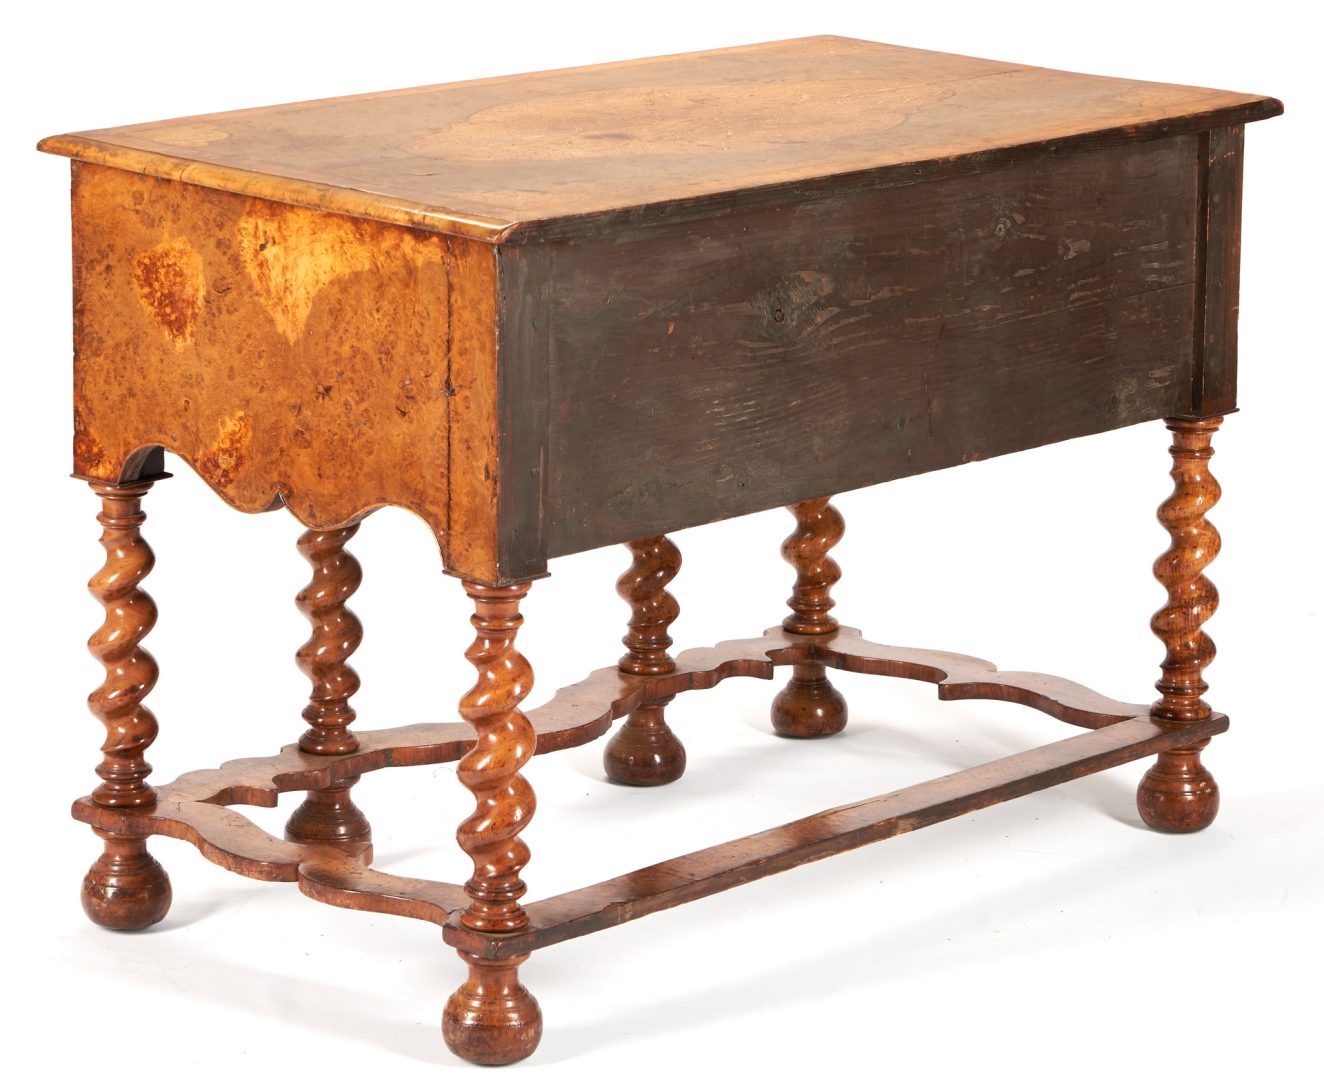 Lot 153: English William & Mary Style Inlaid Table